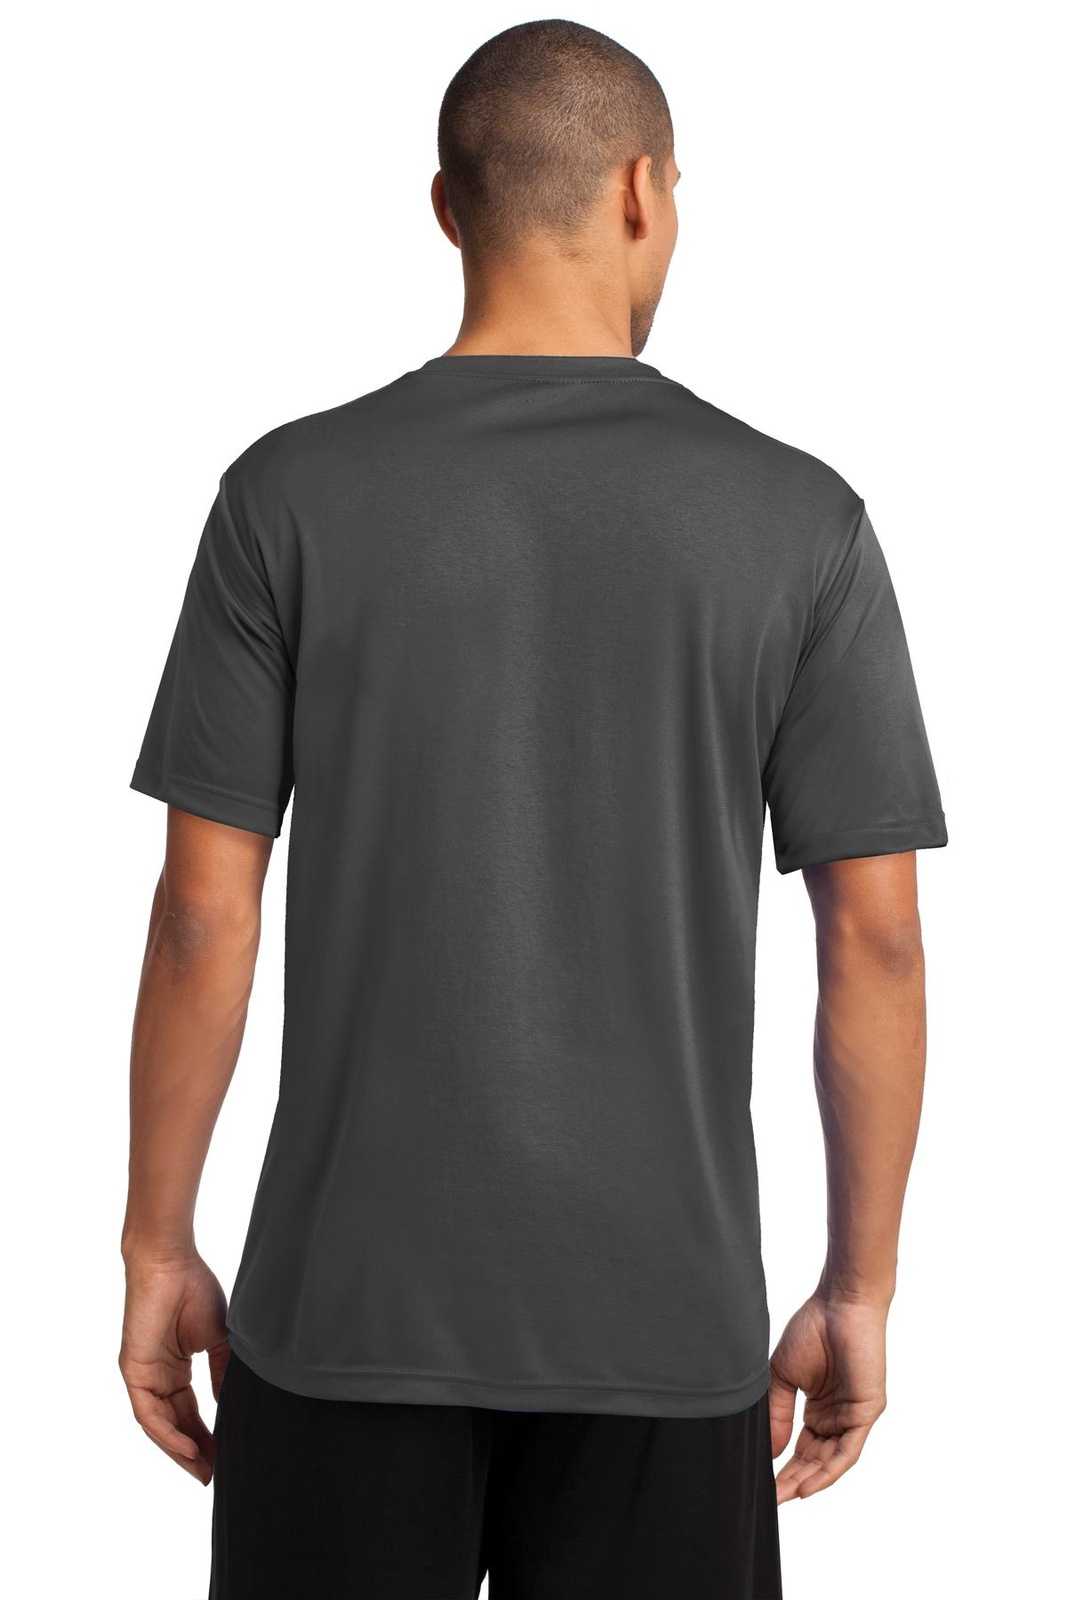 Port & Company PC380 Performance Tee - Charcoal - HIT a Double - 1